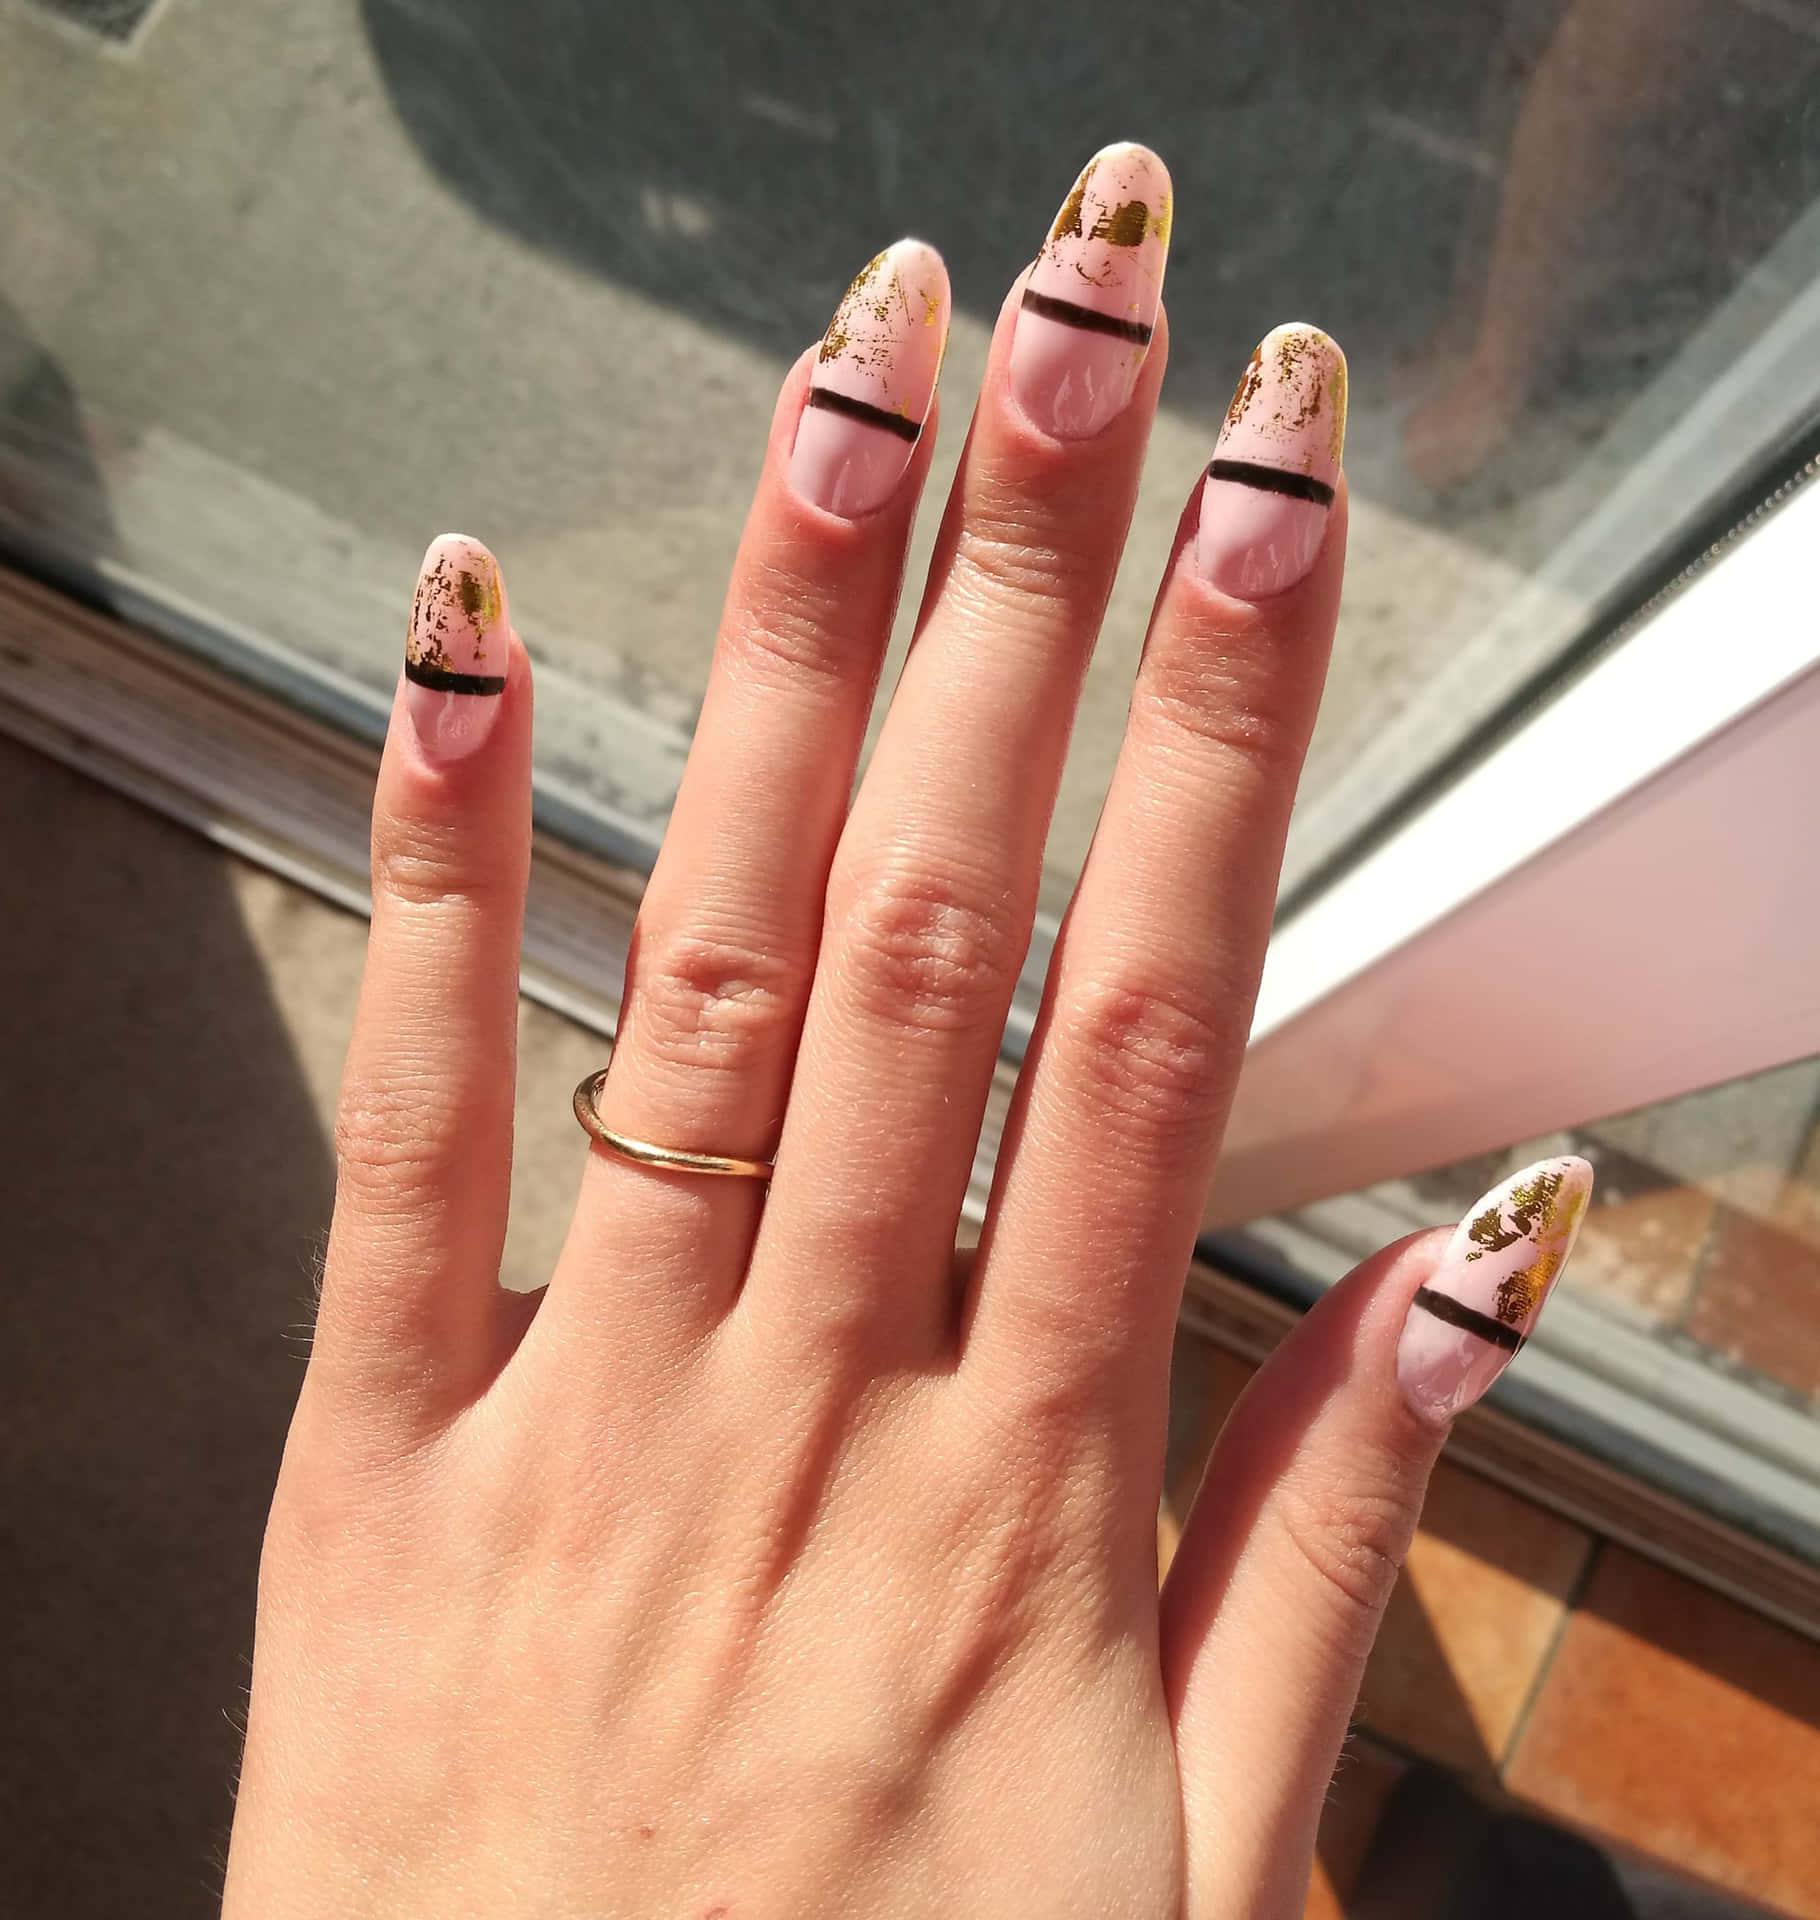 A Woman's Hand With Gold And Black Nails